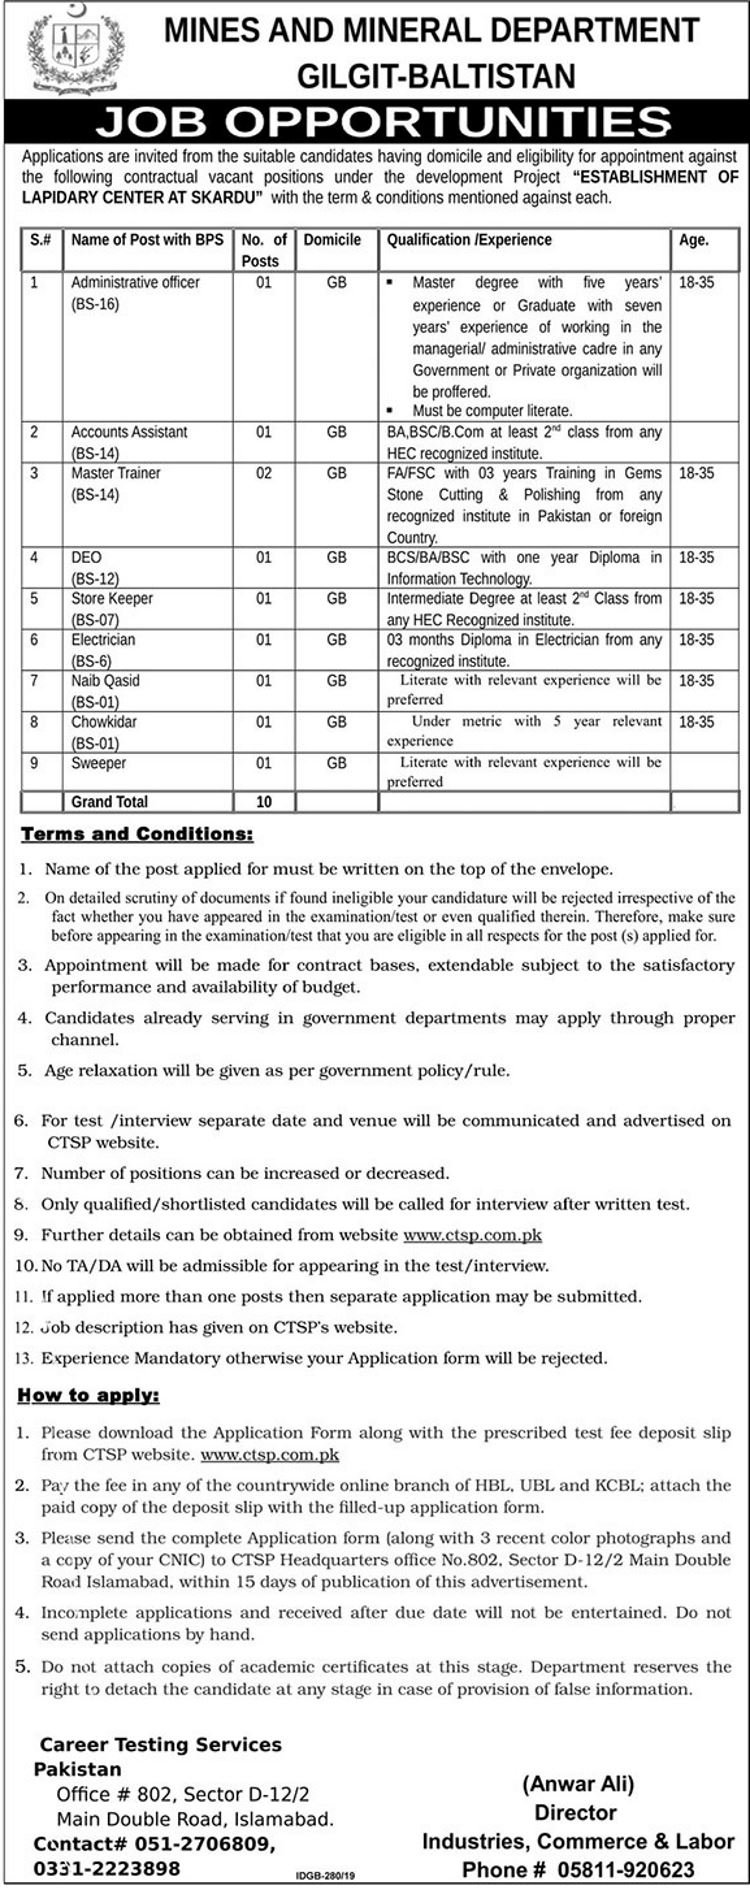 Mines & Mineral Department Gilgit-Baltistan Jobs 2019 for 10+ Admin, Accounts, Master Trainer, DEO, Store Keeper & Support Staff (Download CTSP Form)